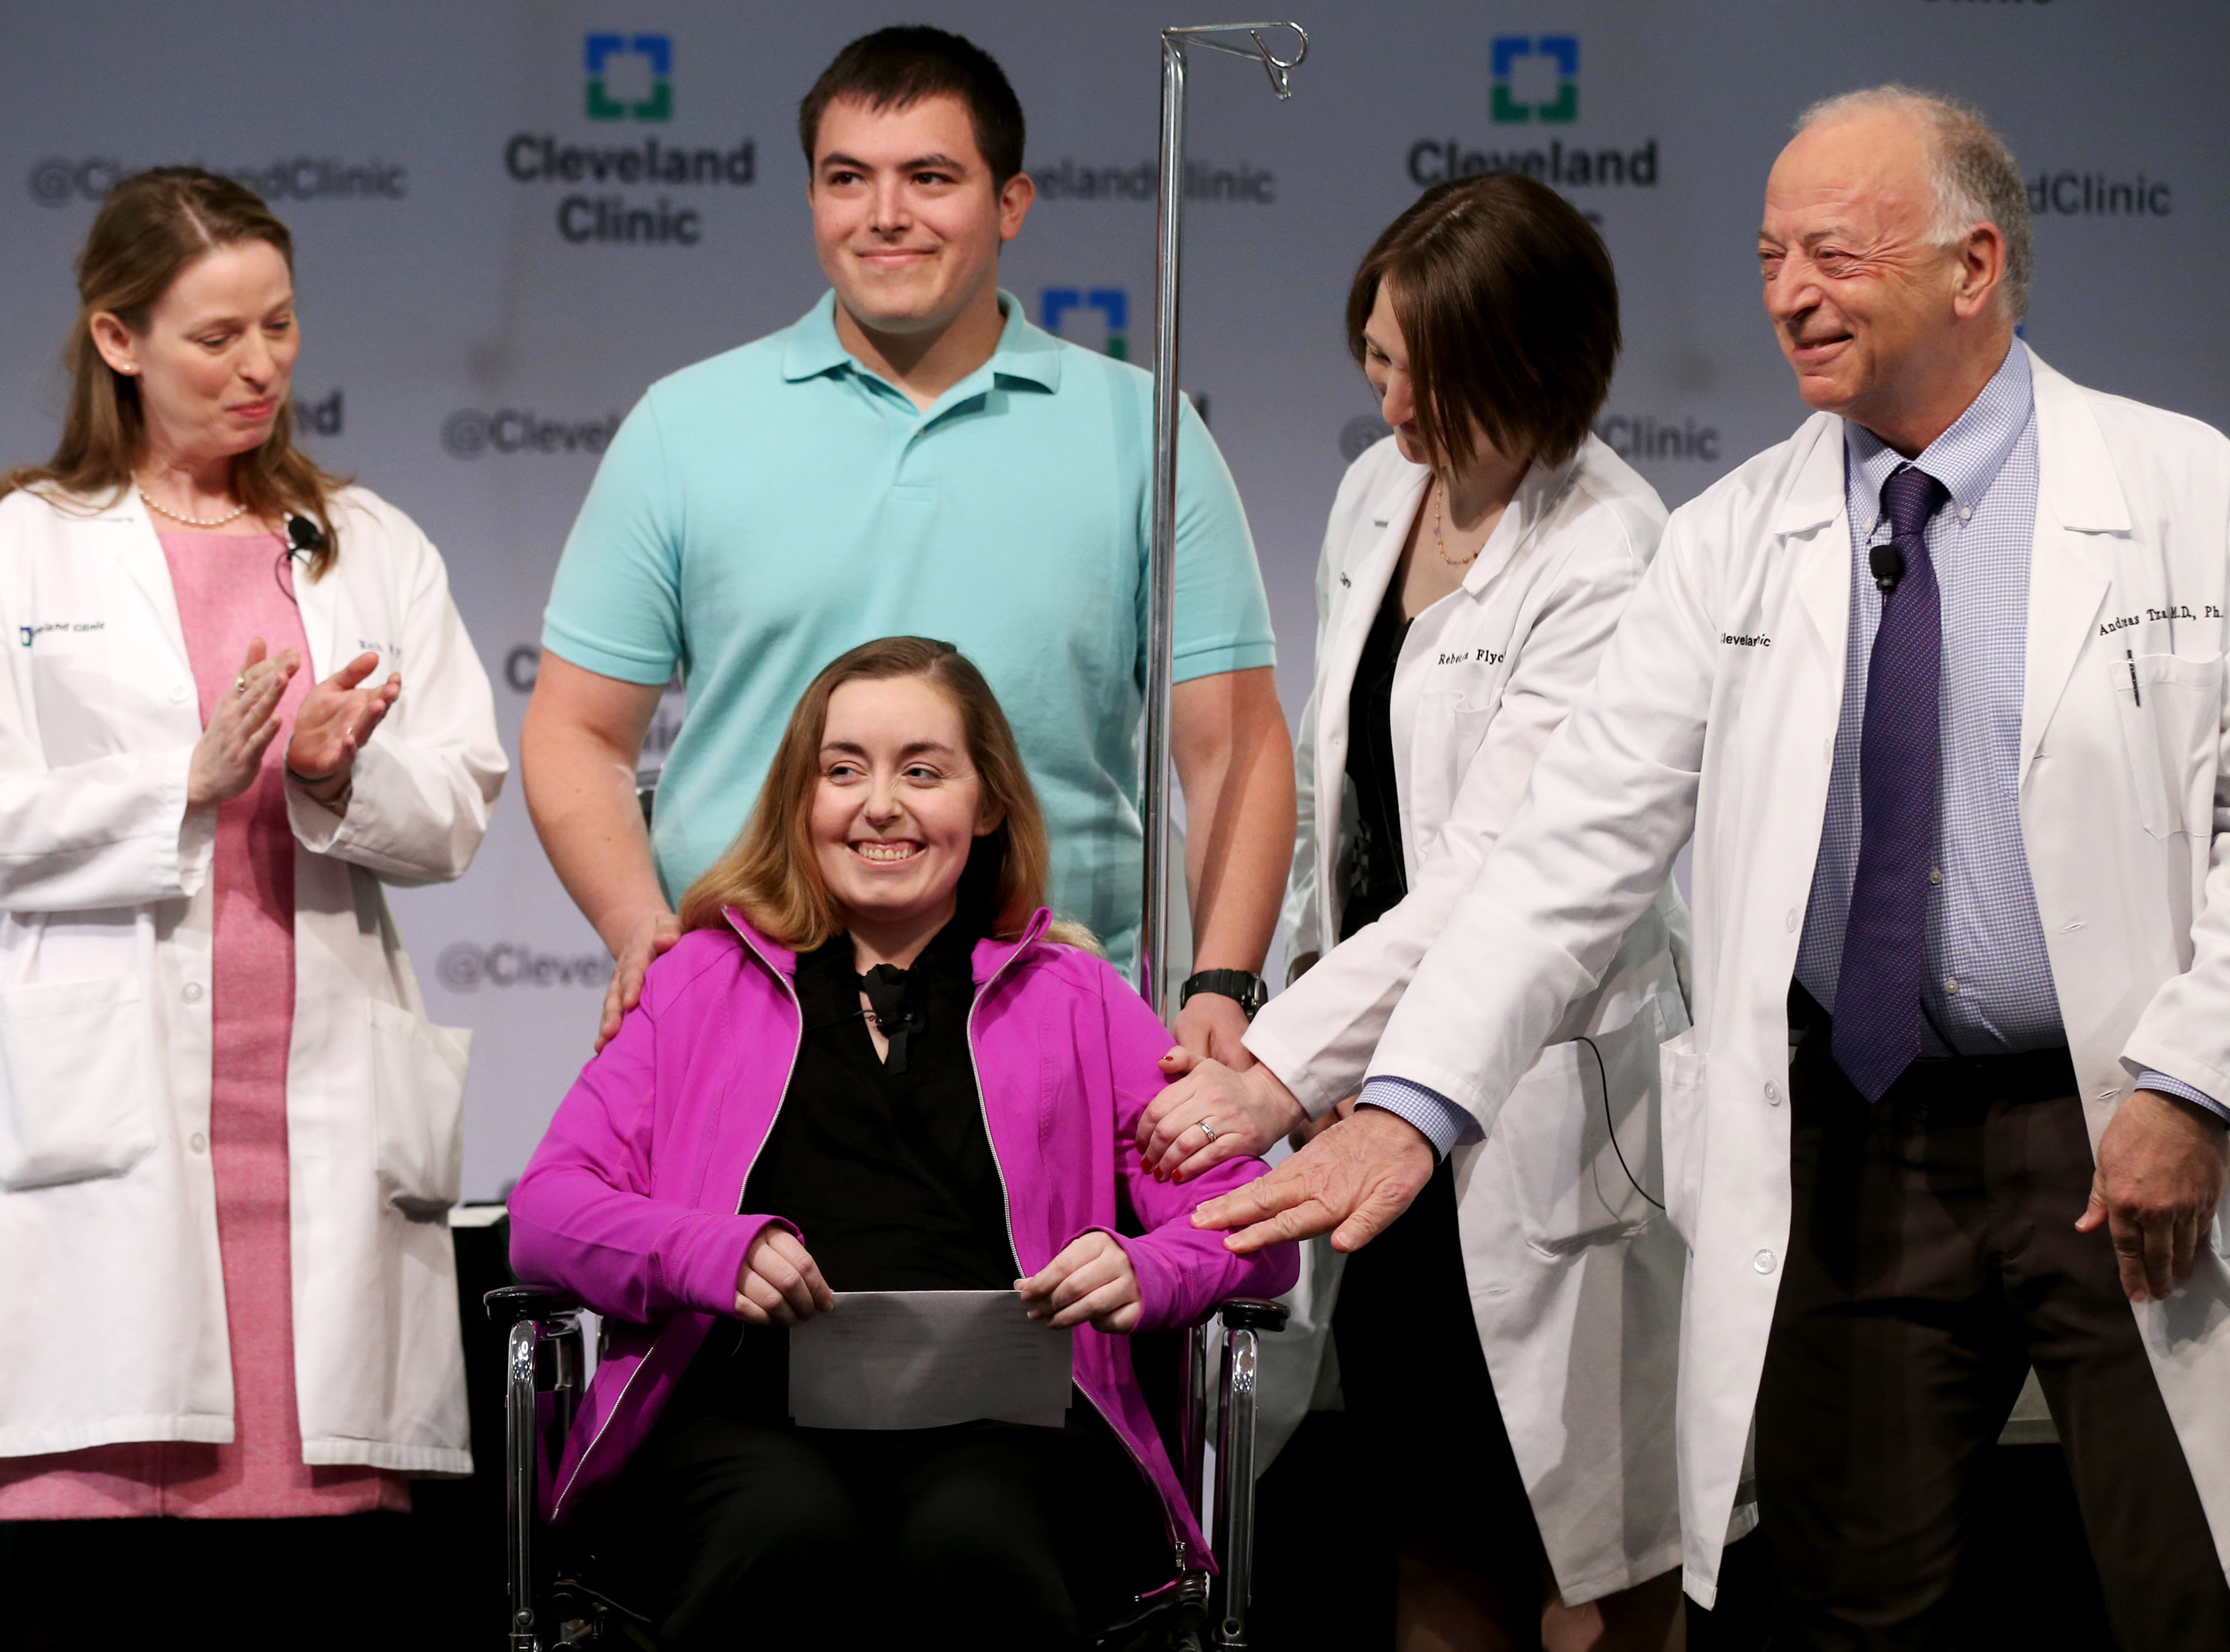 Lindsey and her husband Blake stand with Cleveland Clinic medical staff as they announce she was the nation's first uterus transplant patient, March 7, 2016, in Cleveland, Ohio (Marvin Fong—AP)